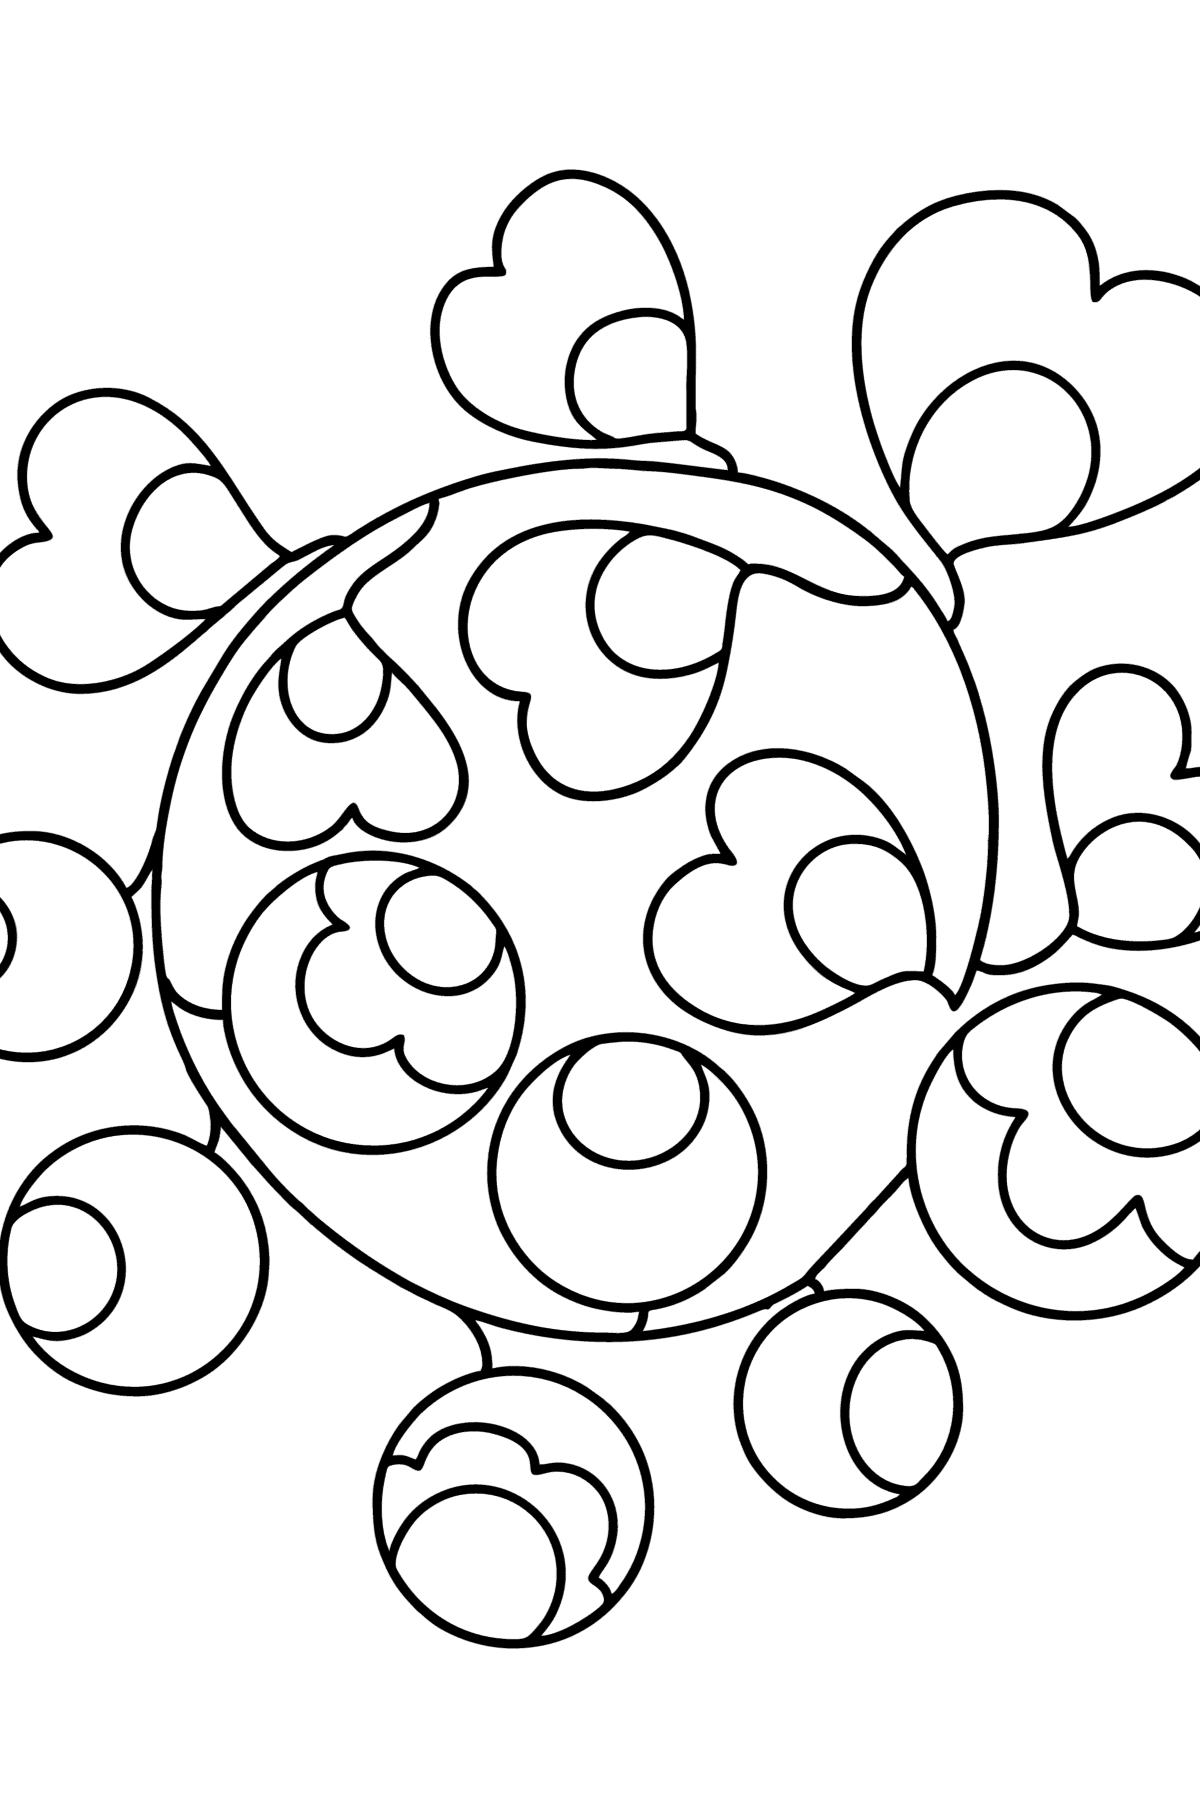 Zentangle Abstract Art coloring page - Coloring Pages for Kids